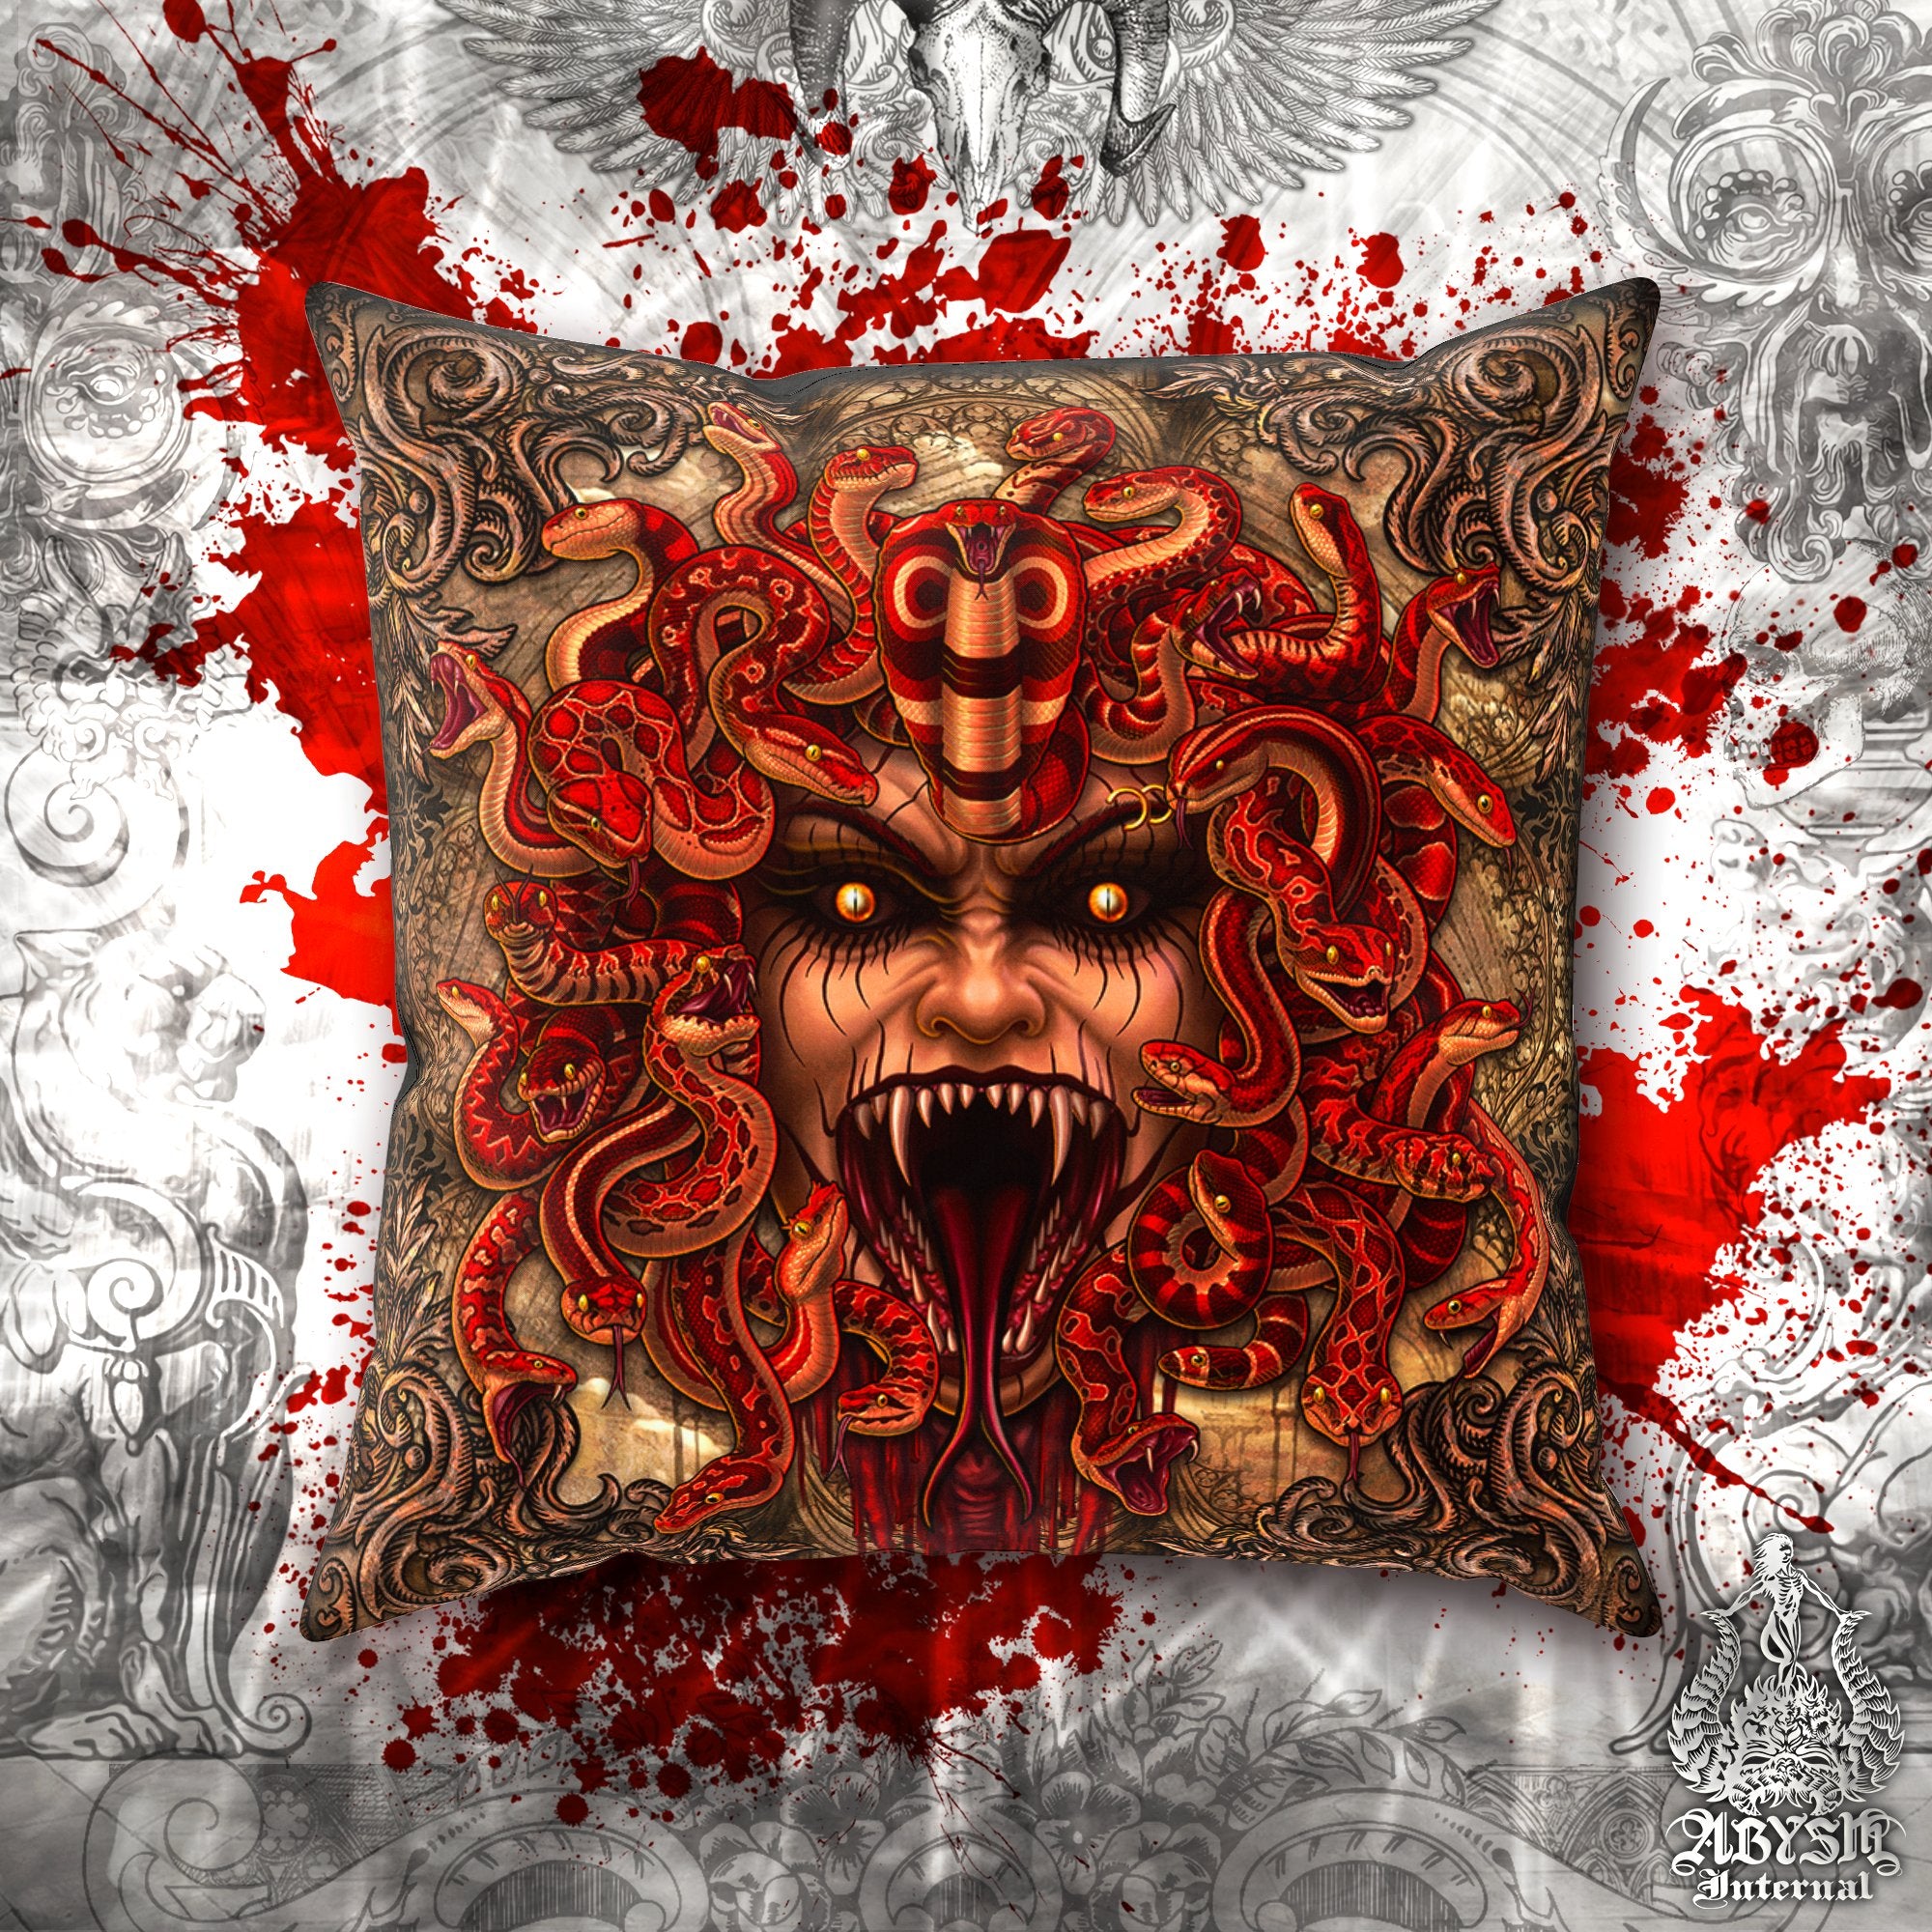 Gothic Throw Pillow, Decorative Accent Pillow, Square Cushion Cover, Goth Room Decor, Skull Horror Art, Alternative Home - Medusa, Beige Snakes, 4 Faces - Abysm Internal